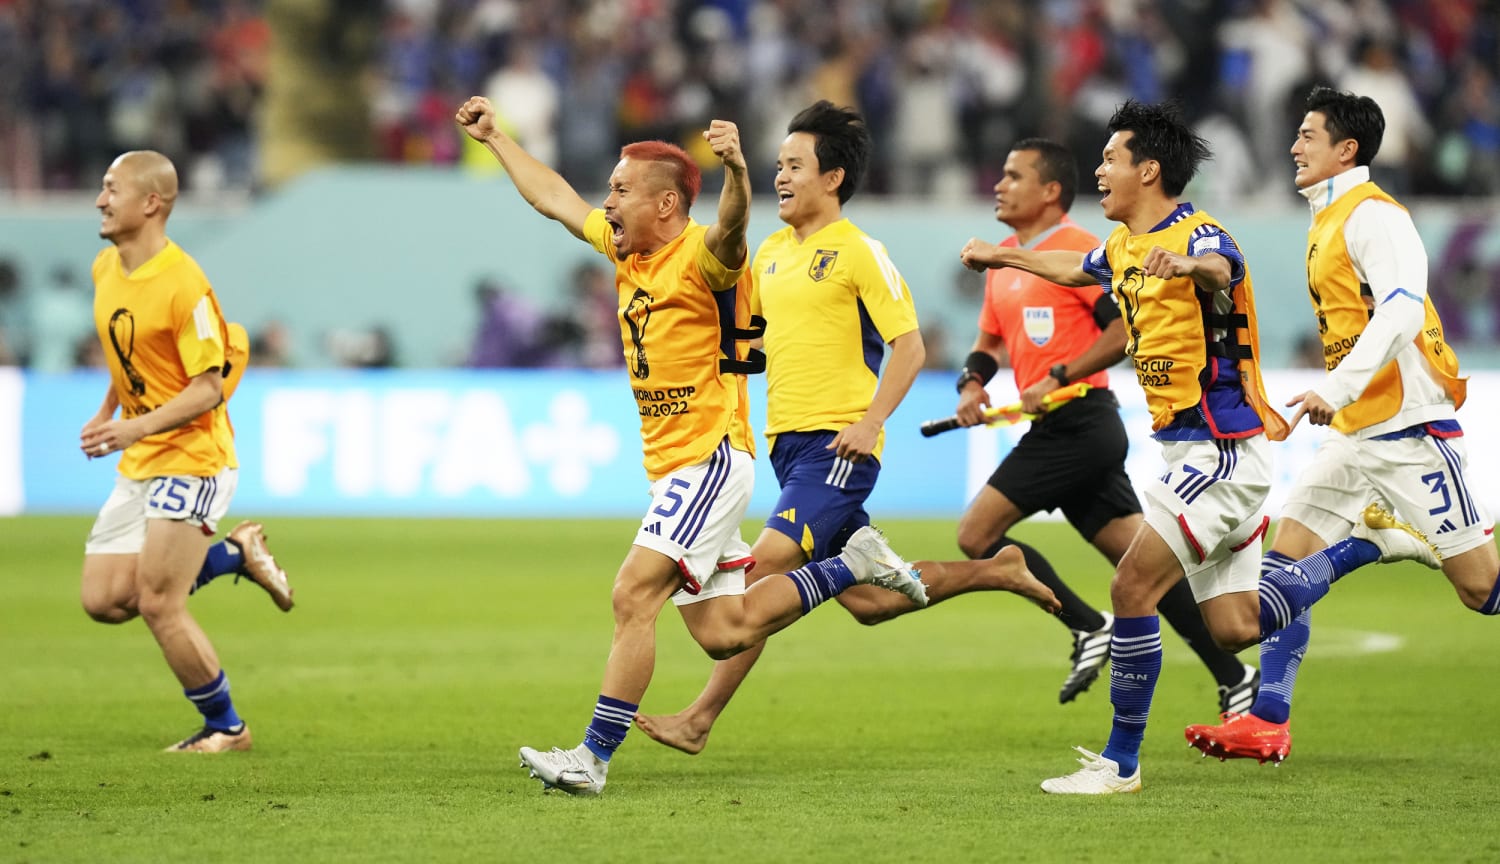 SOCCER/ Japan gets 2 late goals to upset Germany 2-1 at World Cup